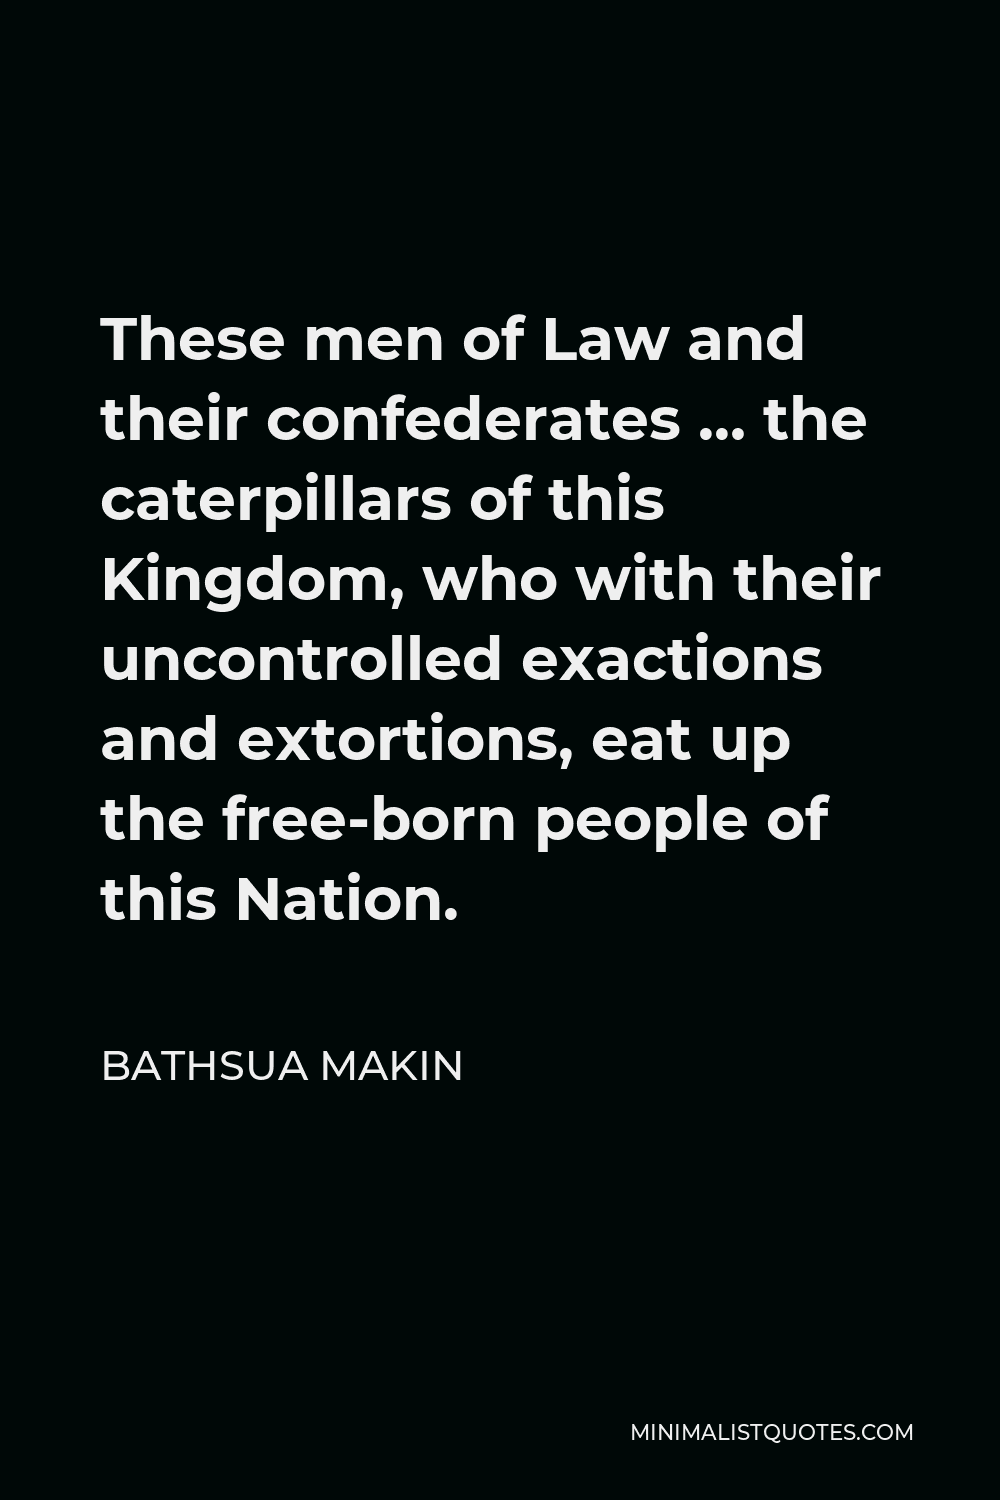 Bathsua Makin Quote - These men of Law and their confederates … the caterpillars of this Kingdom, who with their uncontrolled exactions and extortions, eat up the free-born people of this Nation.